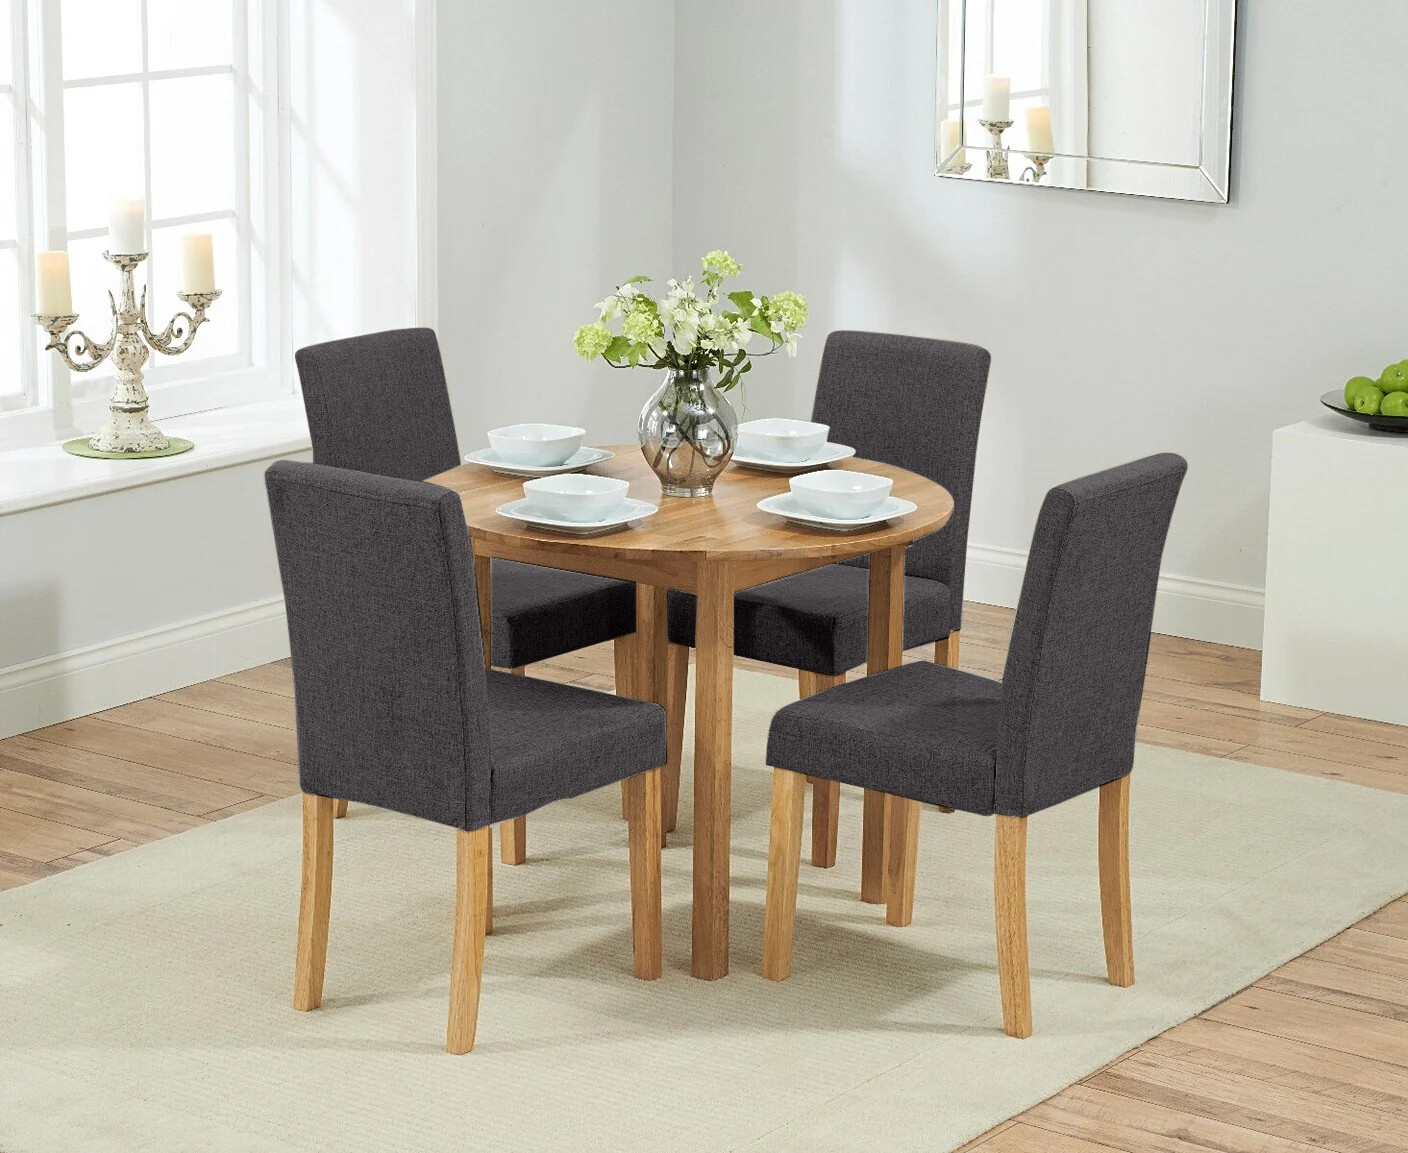 Extending York 90cm Solid Oak Dining Table With 2 Charcoal Grey Lila Chairs